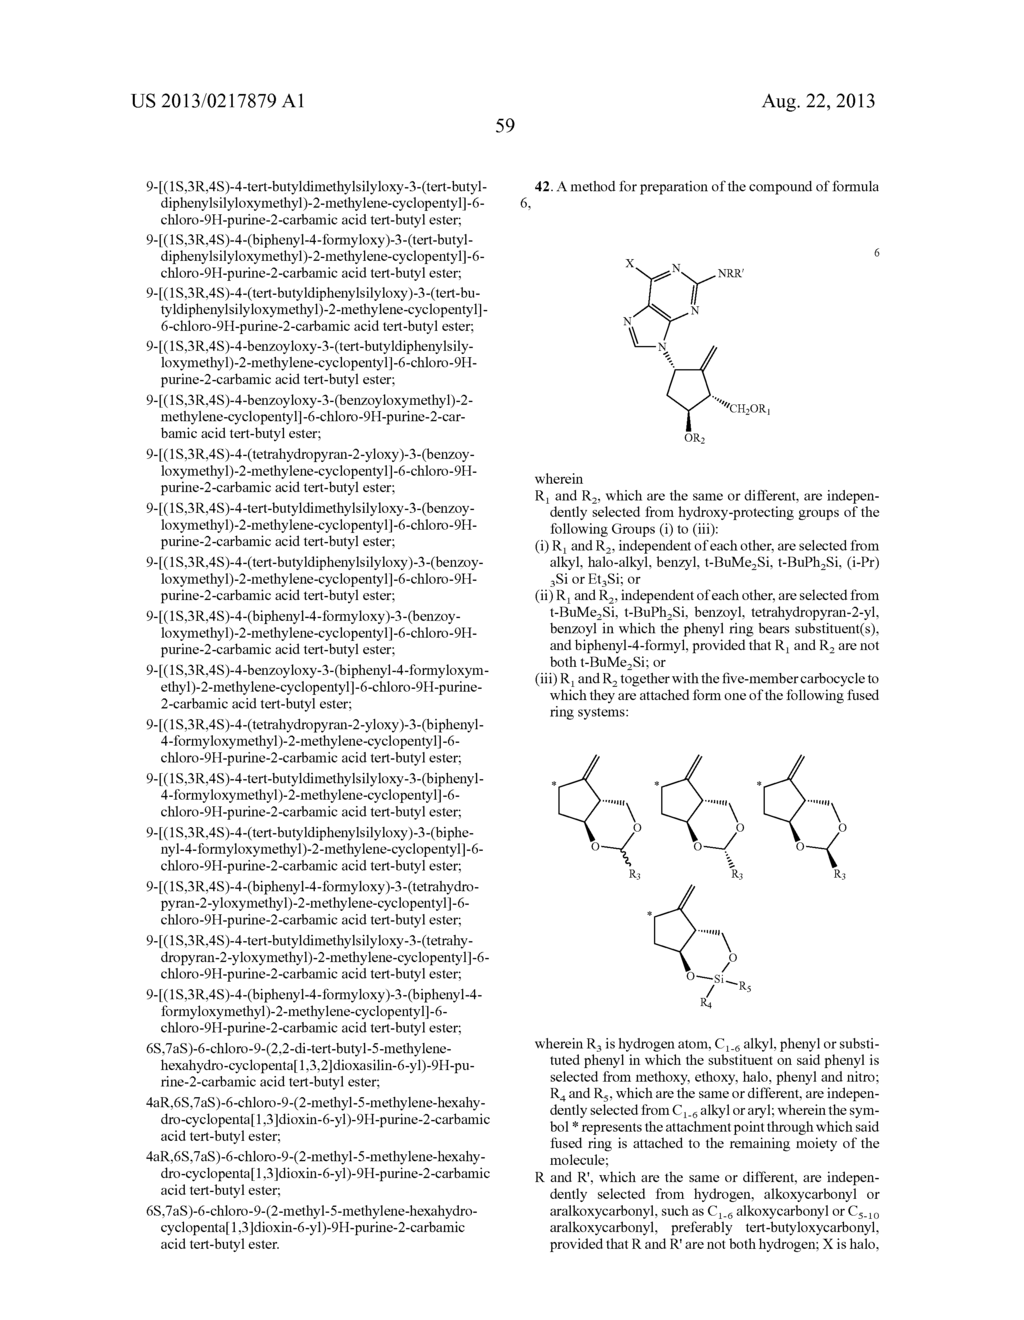 ENTECAVIR SYNTHESIS METHOD AND INTERMEDIATE COMPOUND THEREOF - diagram, schematic, and image 60